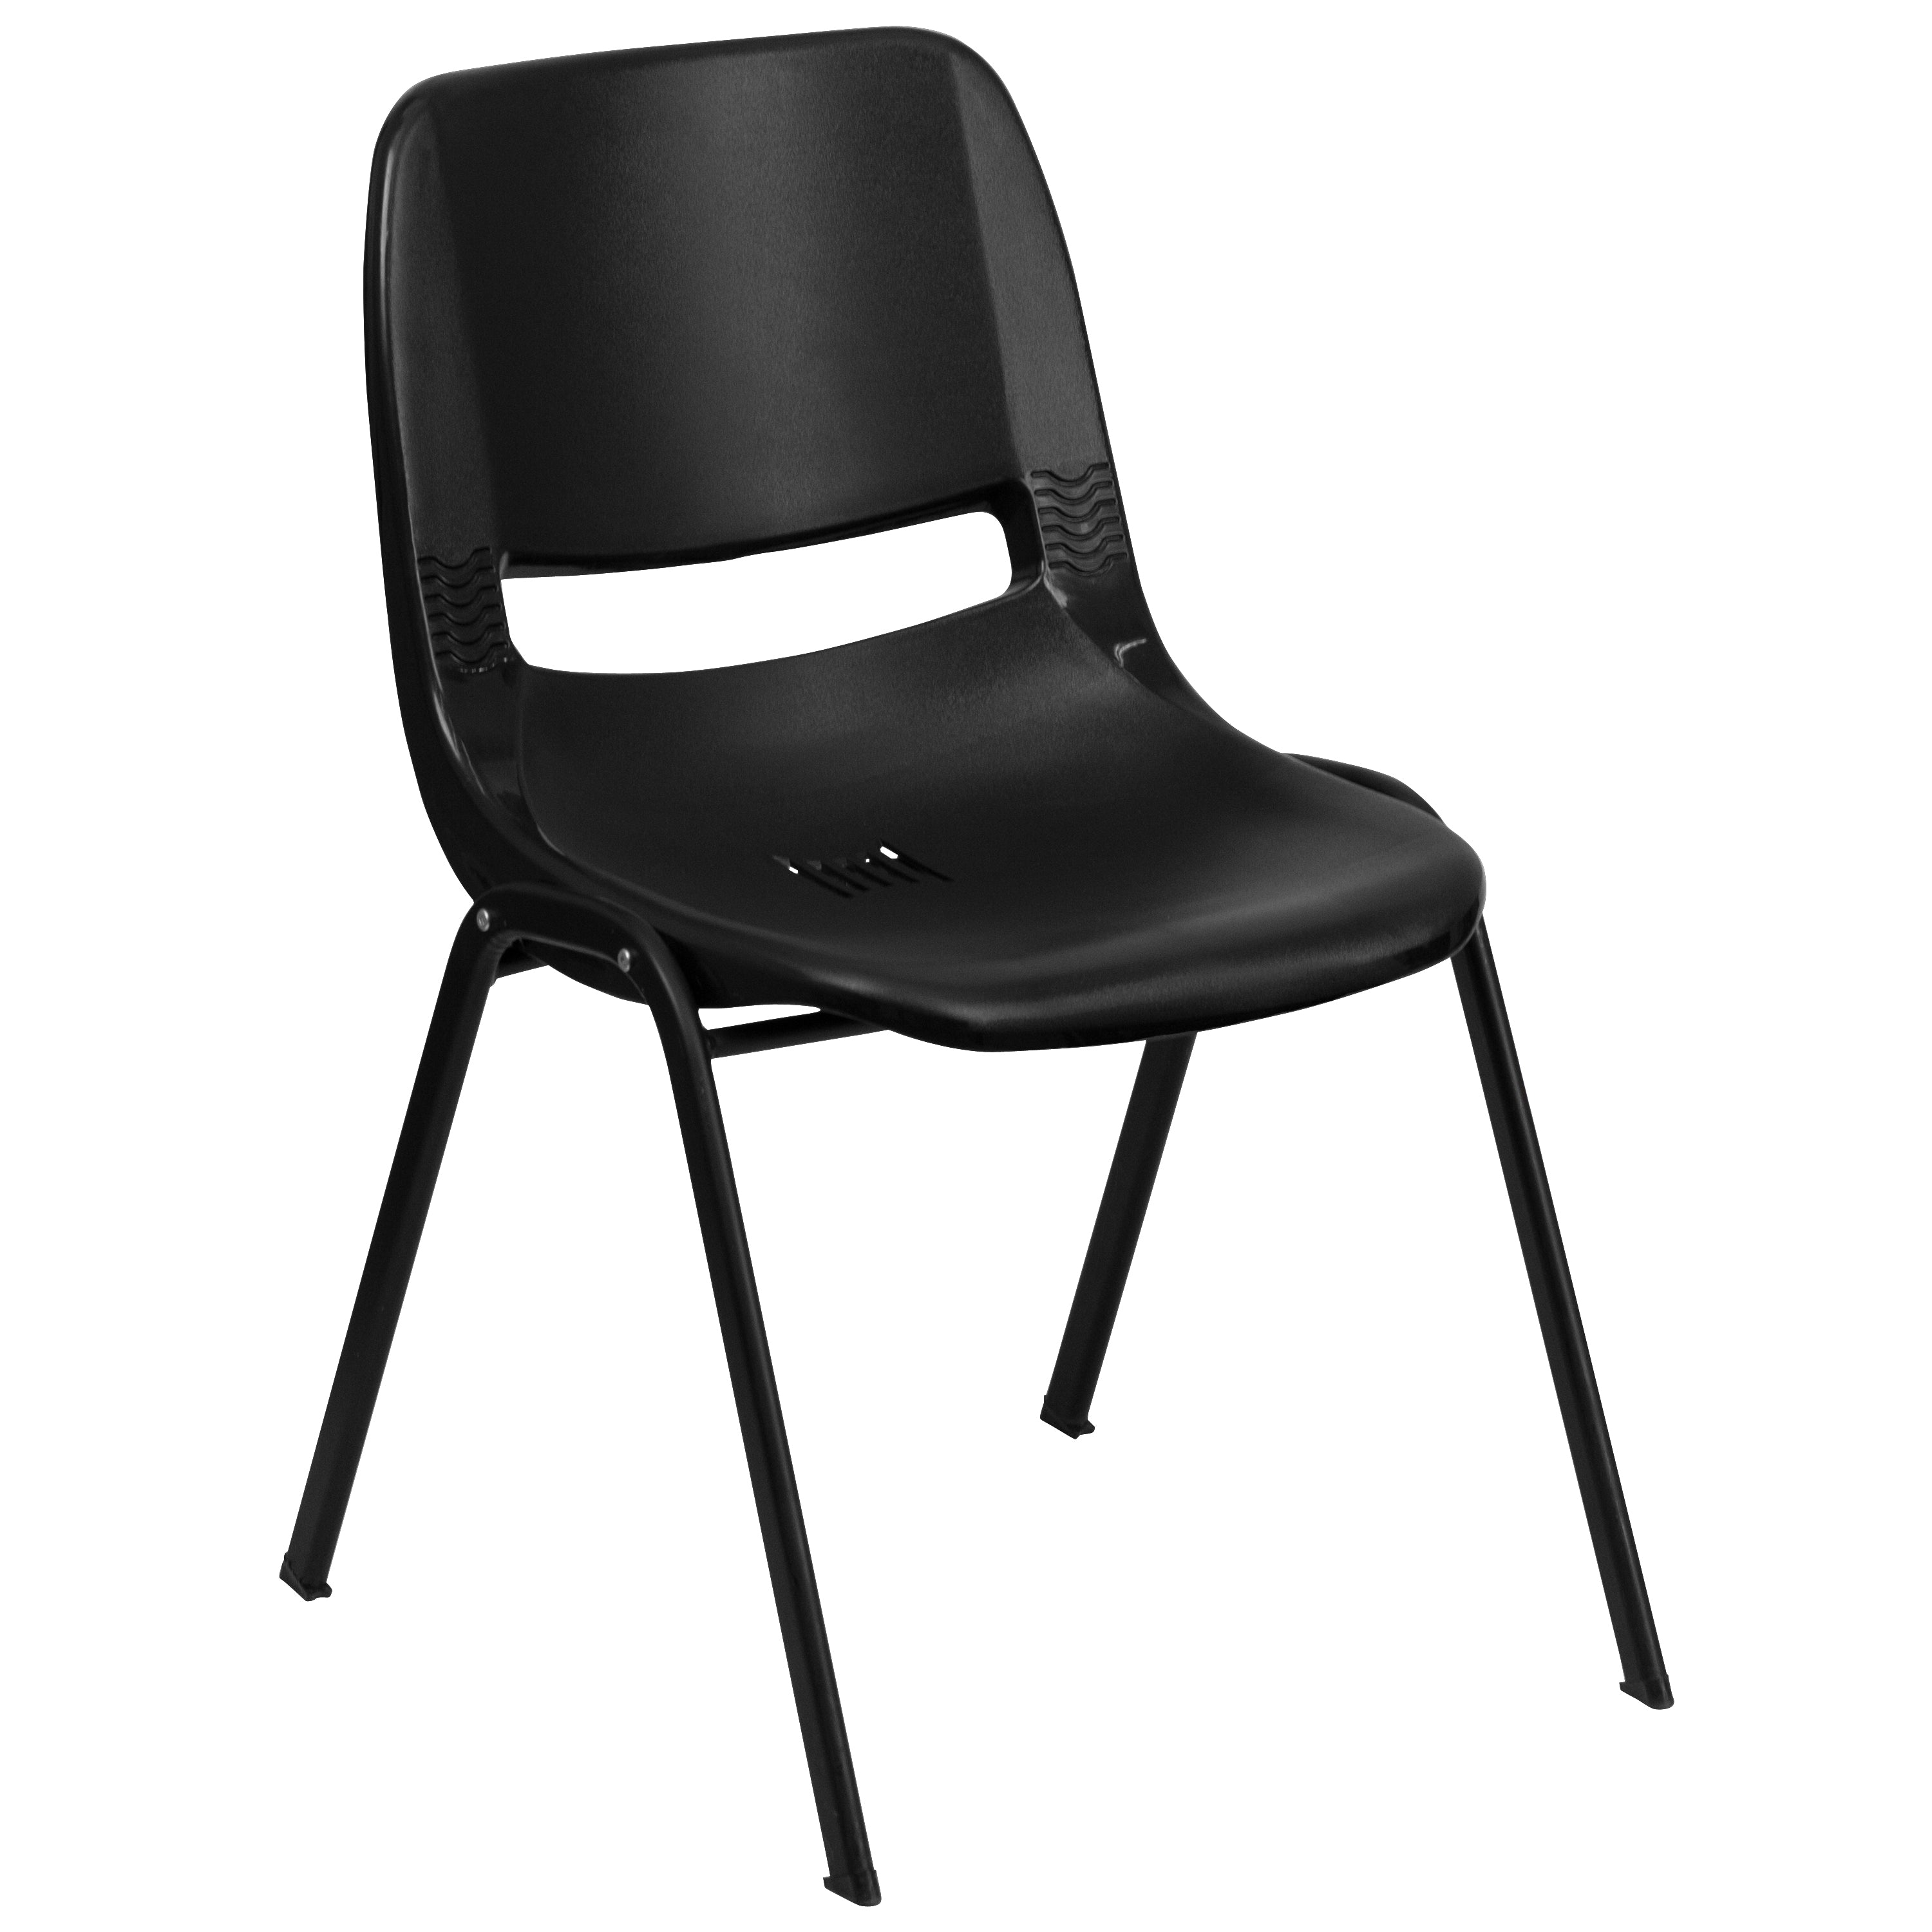 HERCULES Series 440 lb. Capacity Kid's Ergonomic Shell Stack Chair with 14" Seat Height-Plastic Stack Chair-Flash Furniture-Wall2Wall Furnishings